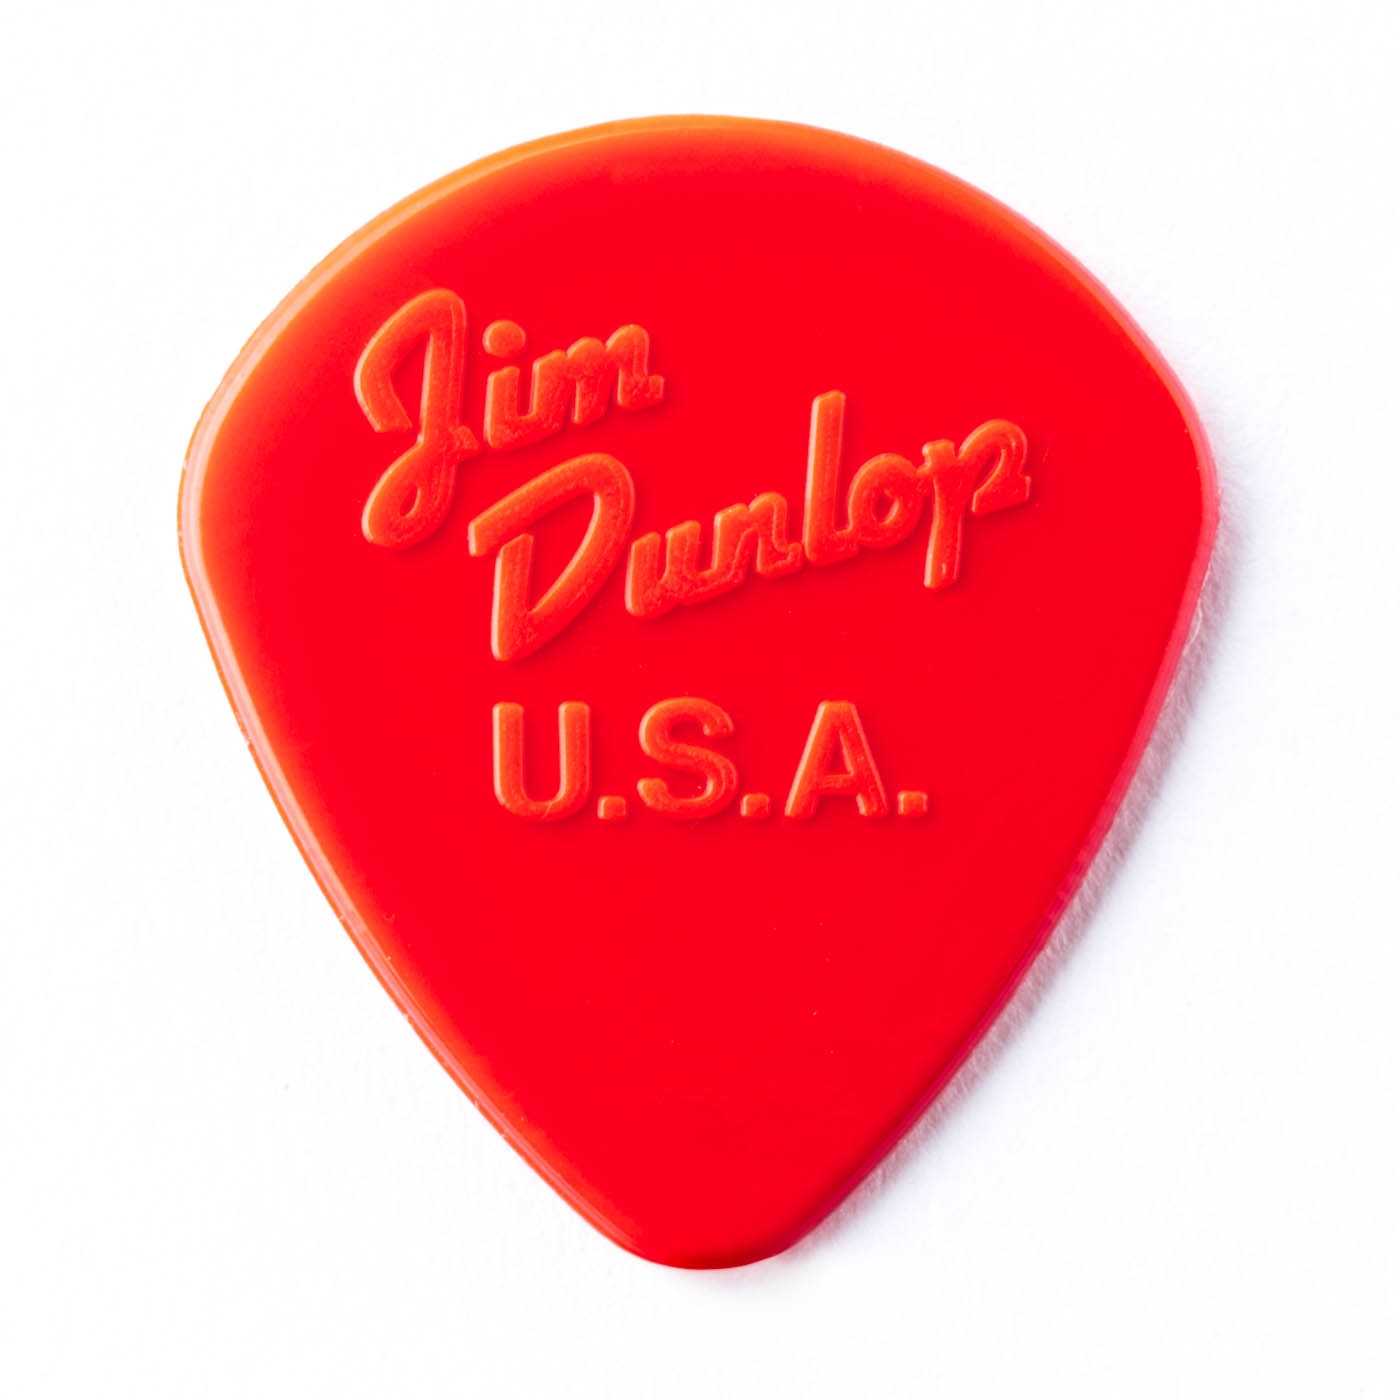 Image 2 of Dunlop Nylon Jazz II 1.18MM Picks, Players Pack of 6 - SKU# PK47P3-RN-JAZZ2 : Product Type Accessories & Parts : Elderly Instruments